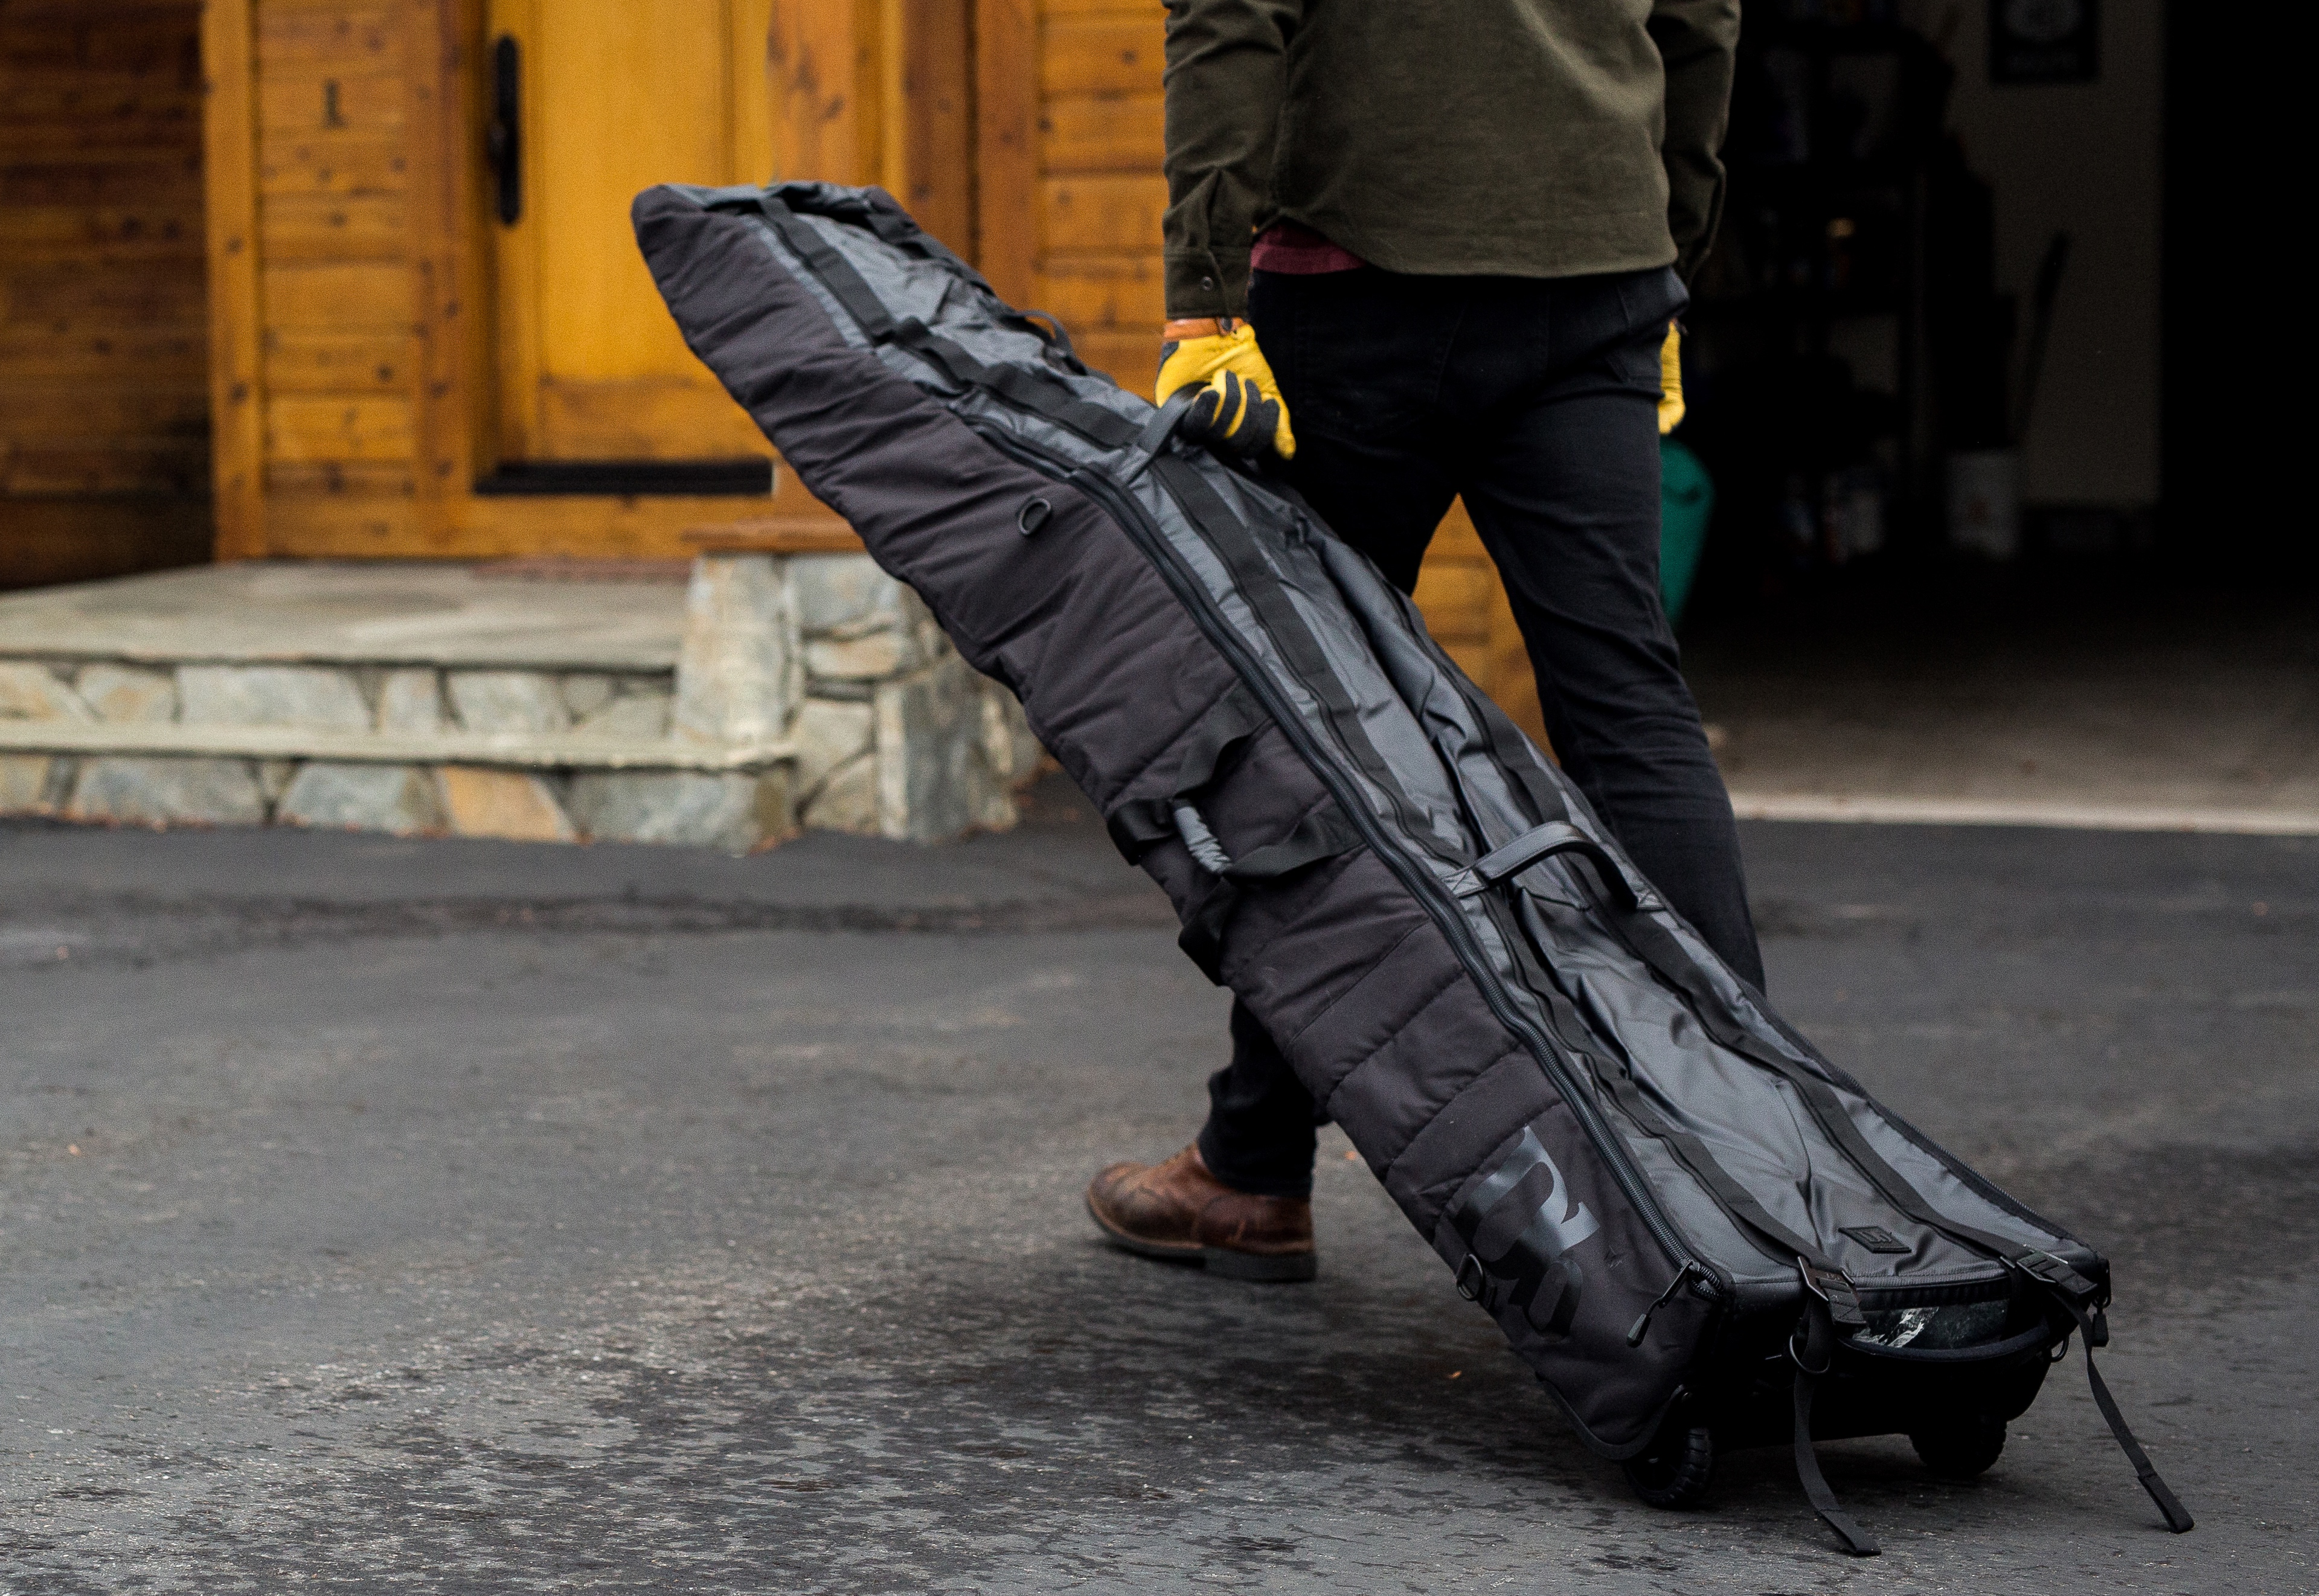 The Amazing 'Snow Roller' Ski And Snowboard Bag Rolls Up To The 